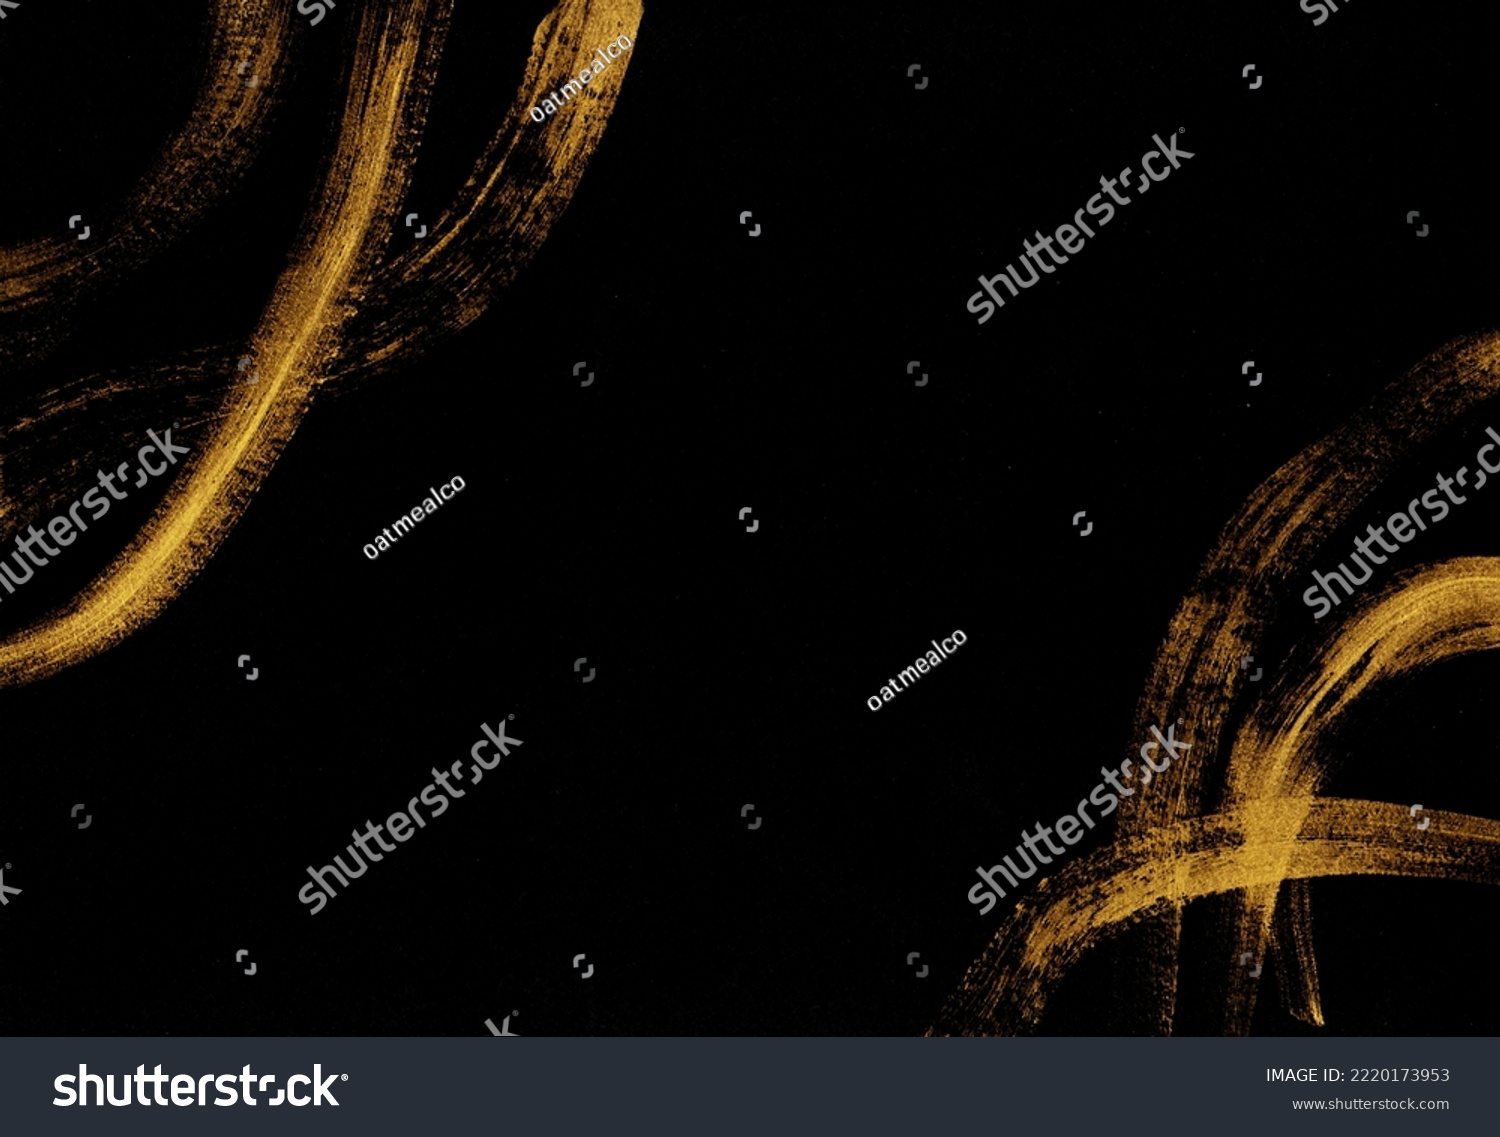 This is a background image in which silver intersecting streamlines are drawn with a brush on a black background
 #2220173953